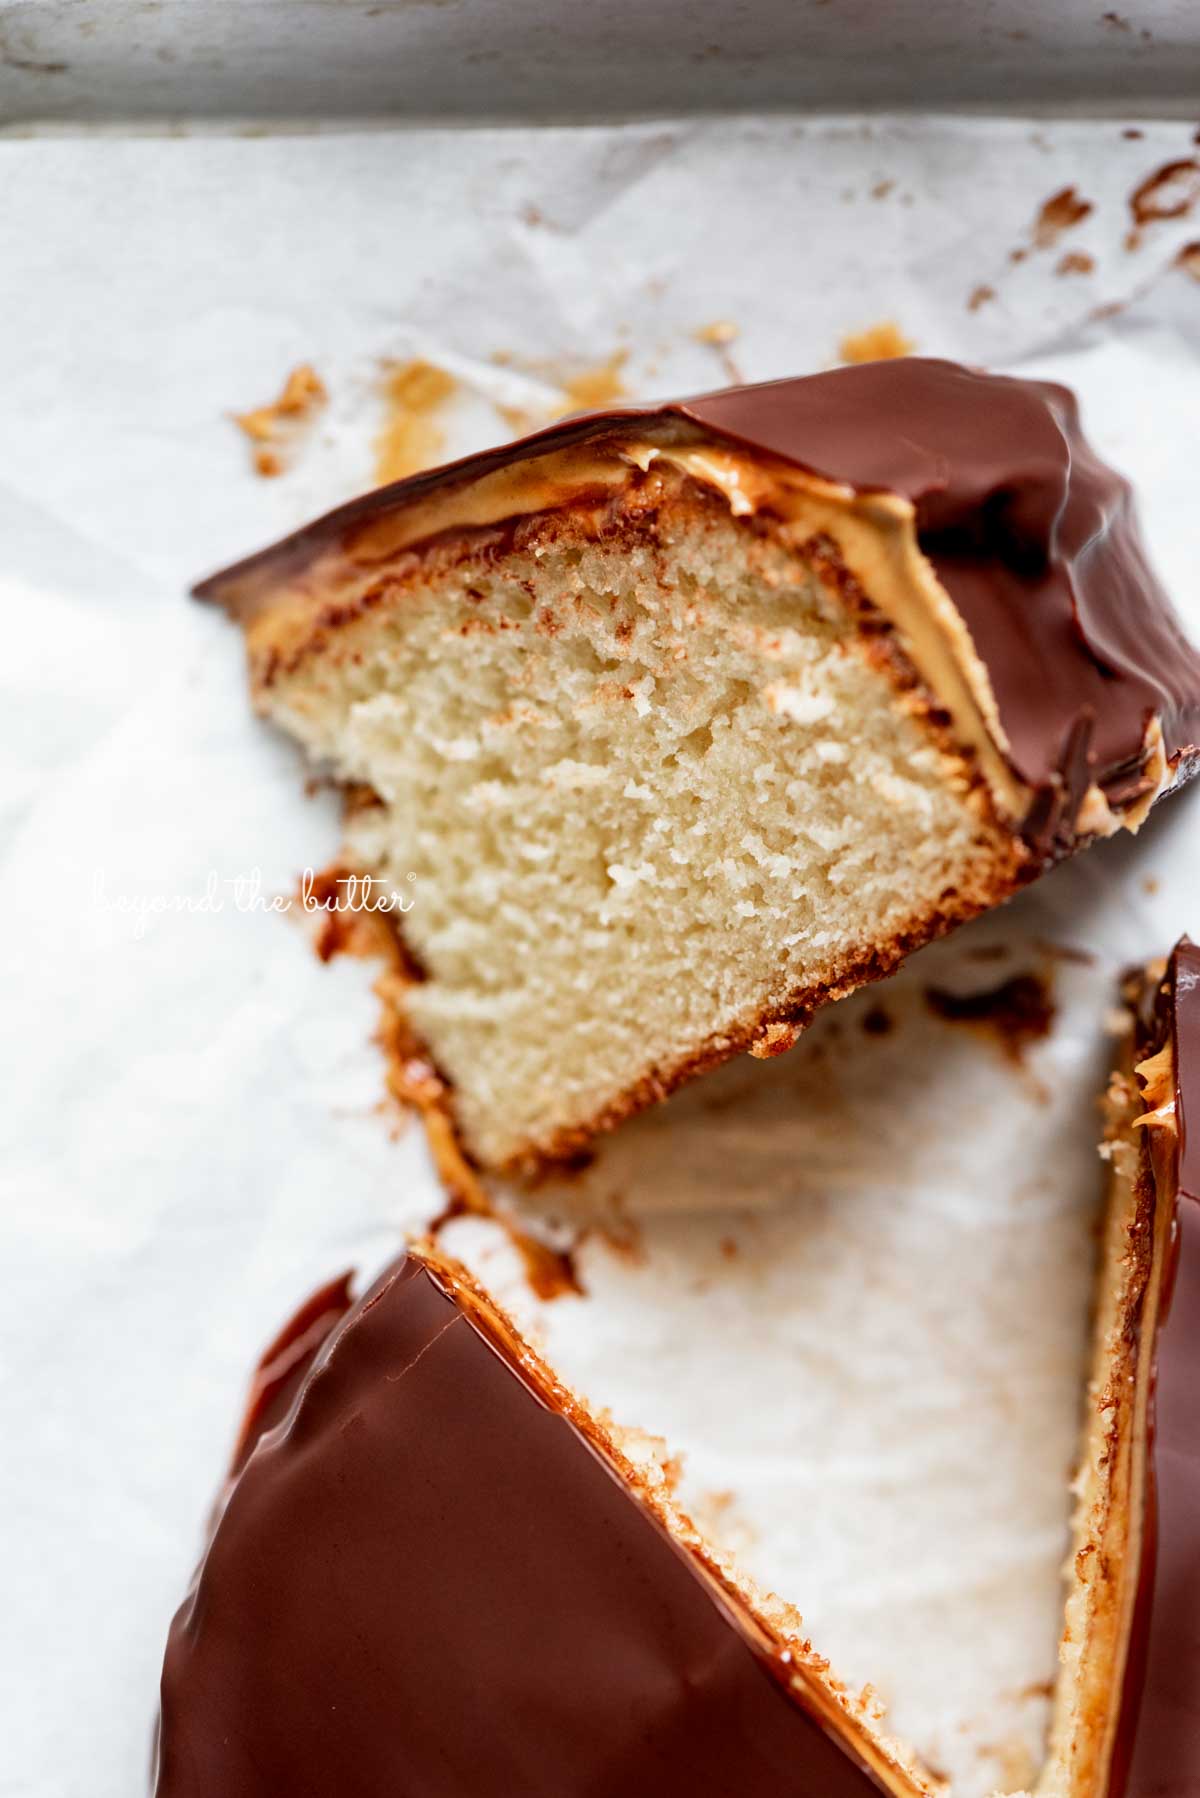 Small chocolate peanut butter tandy kake with a slice removed and placed on its side.